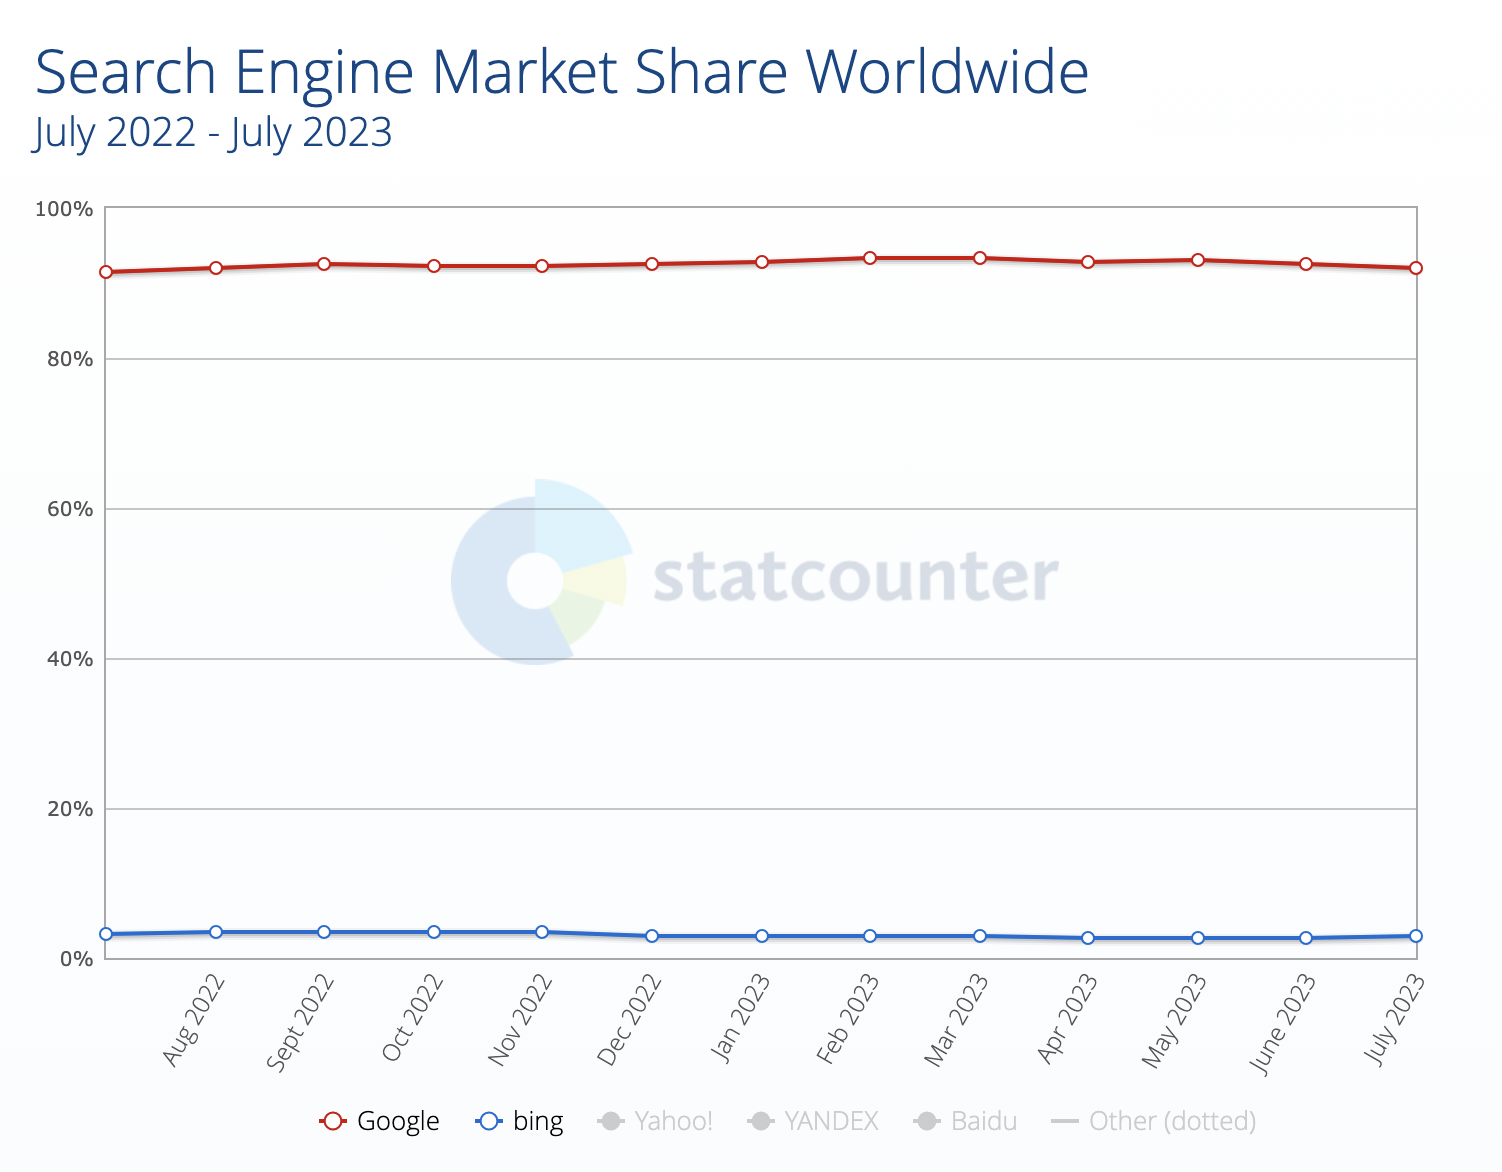 a graph showing "search engine market share worldwide" for July 2022-July 2023 period